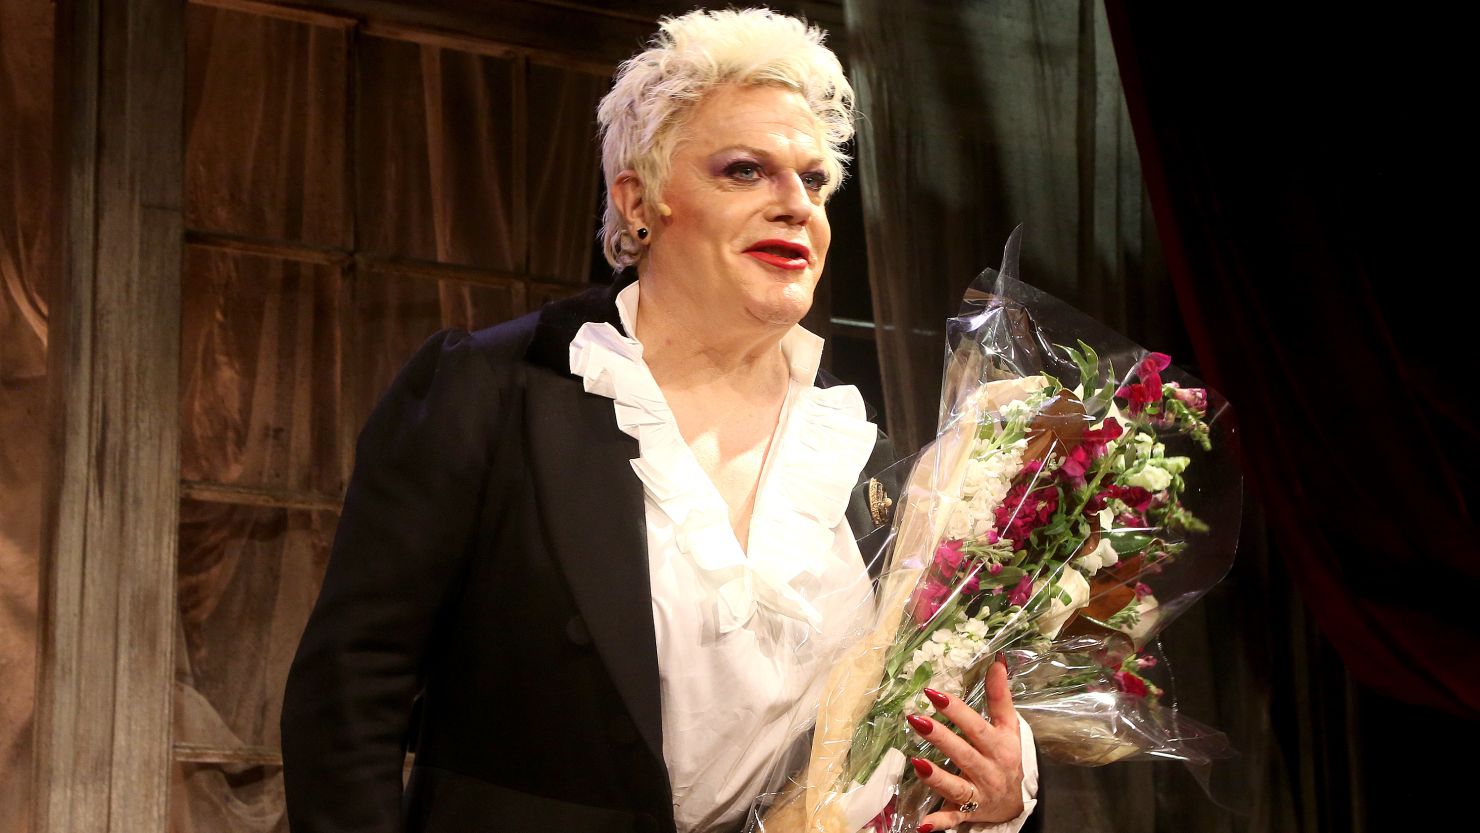 Suzy Eddie Izzard at the opening night of Charles Dickens' 'Great Expectations' in New York in 2022.